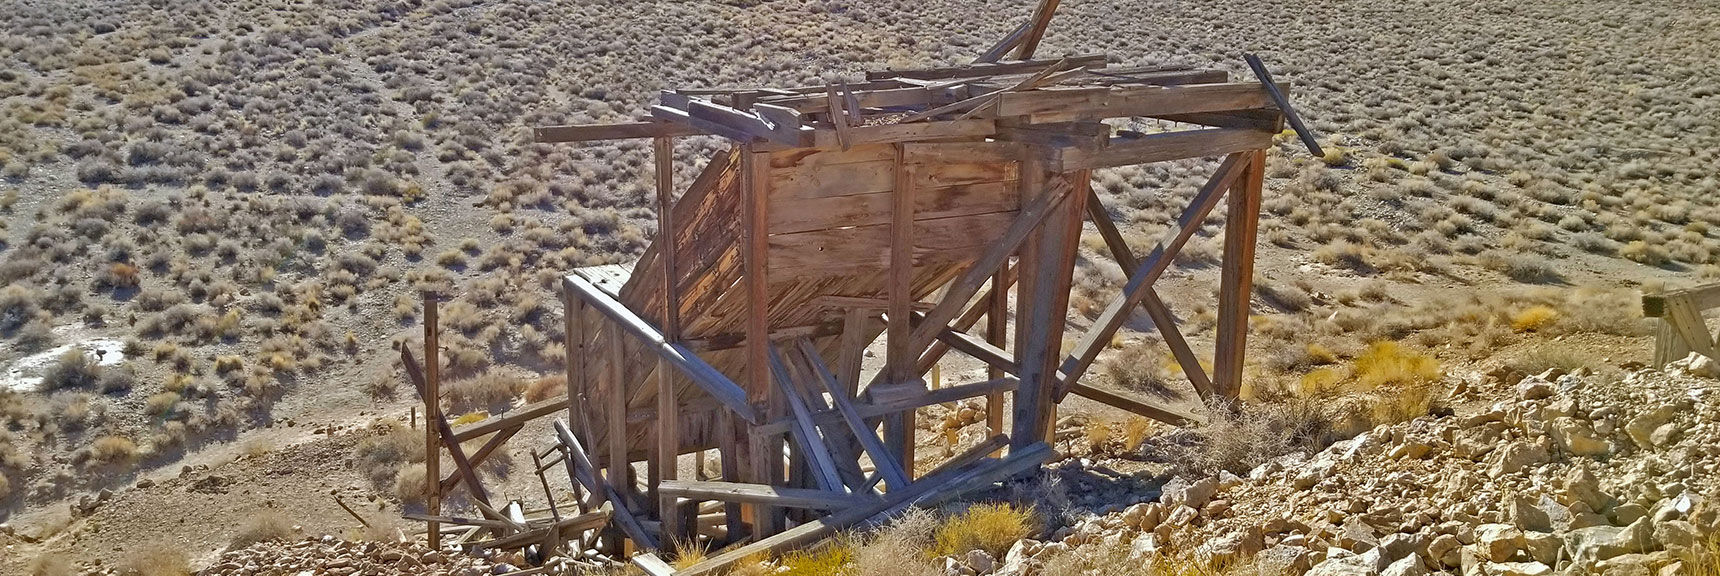 Top Diagonal View of Cashier Mill. Gass Powered Mill Crushed Raw Ore.. | Eureka Mine, Harrisburg, Cashier Mill, Death Valley, California